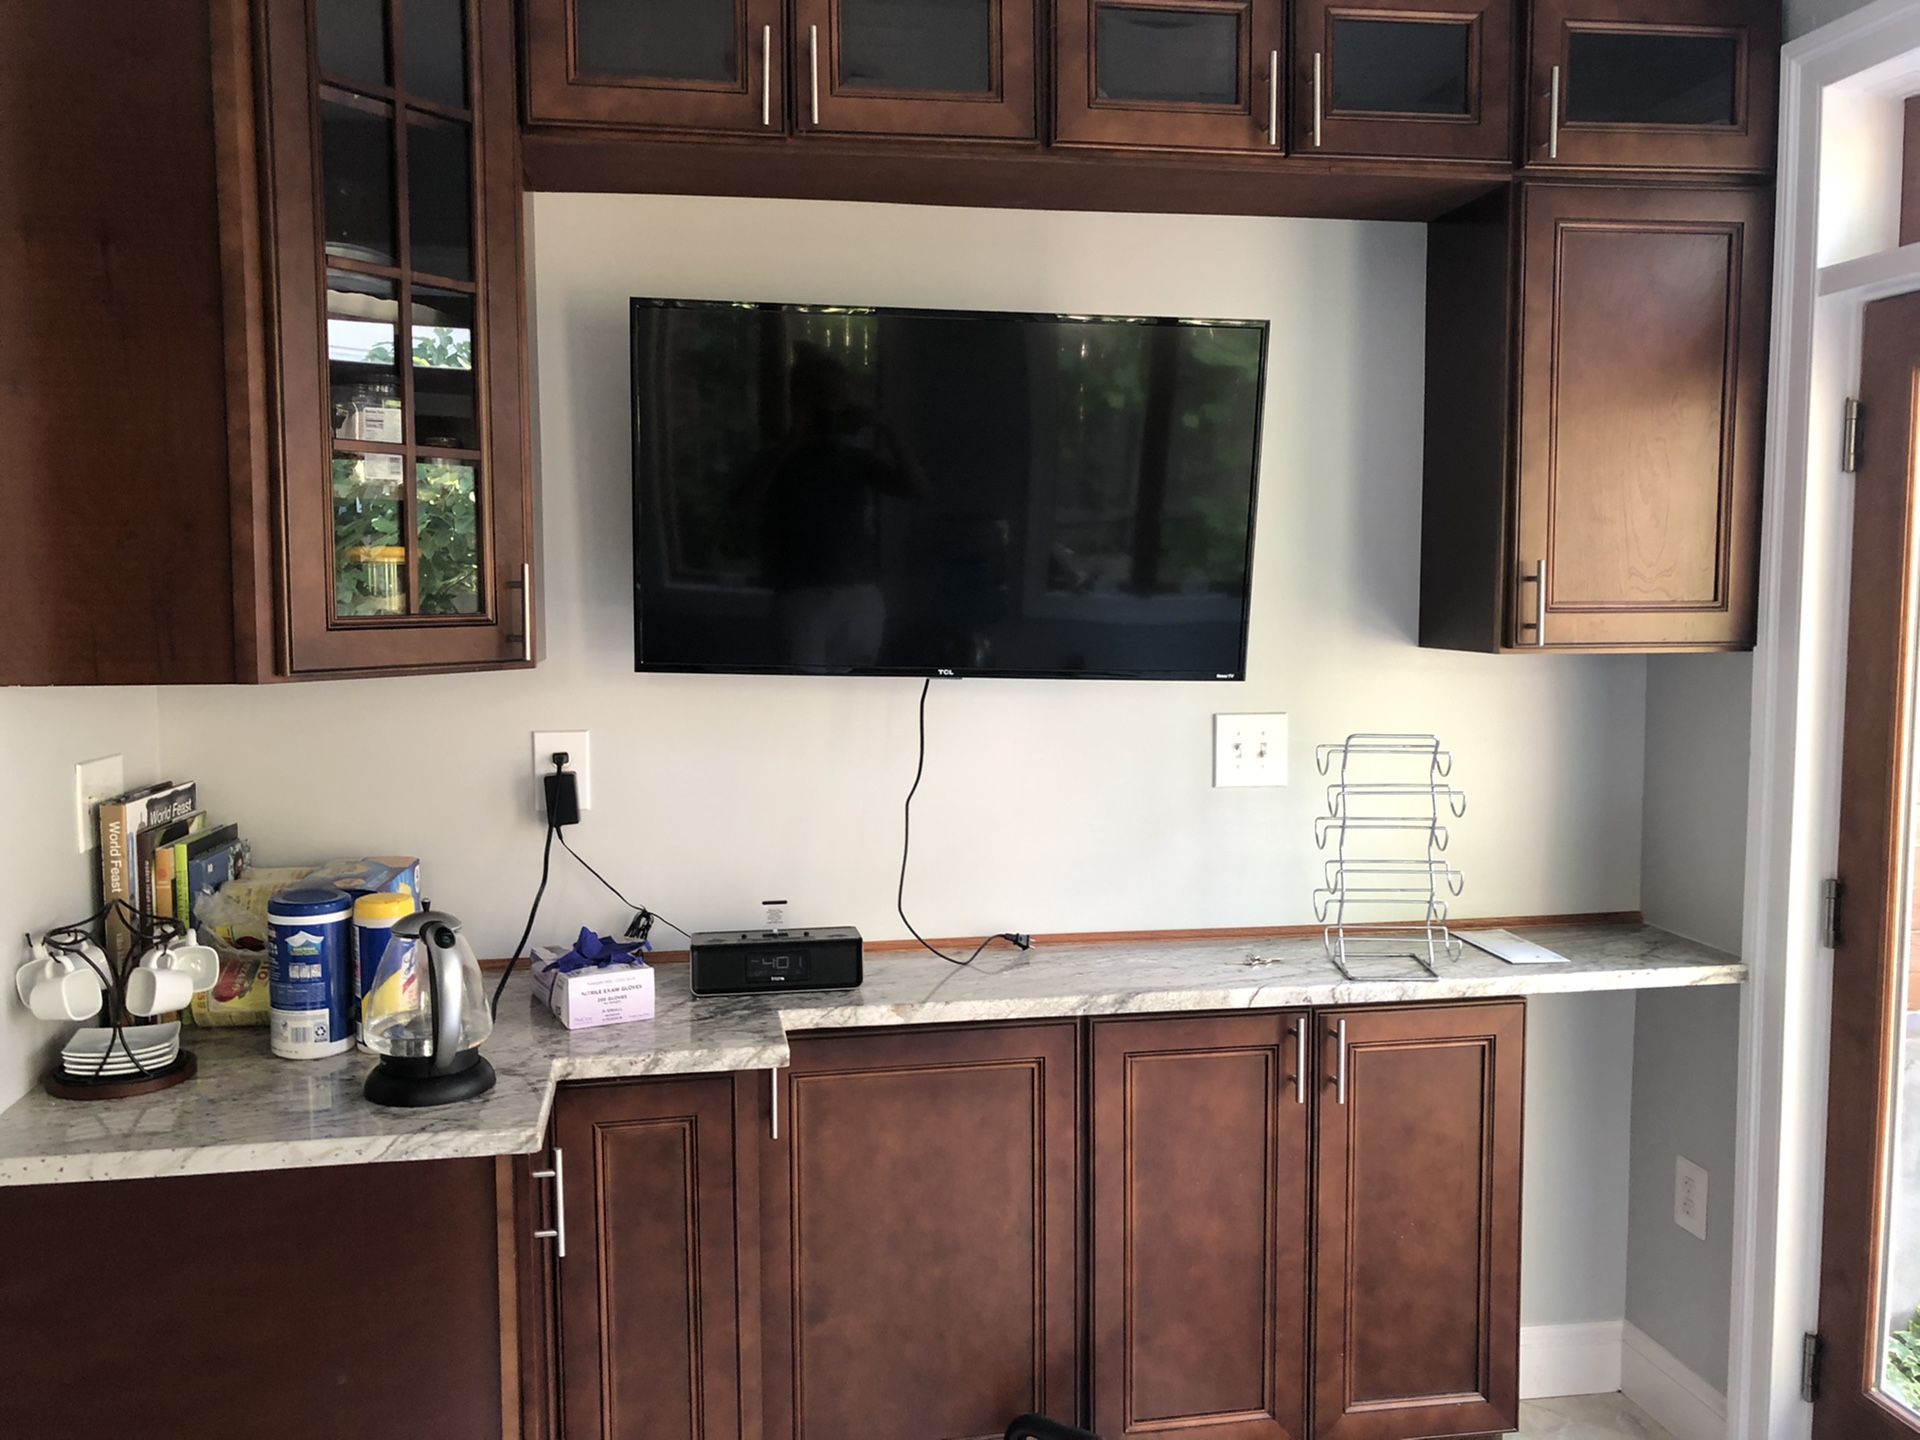 Kitchen cabinets - wood & great condition!